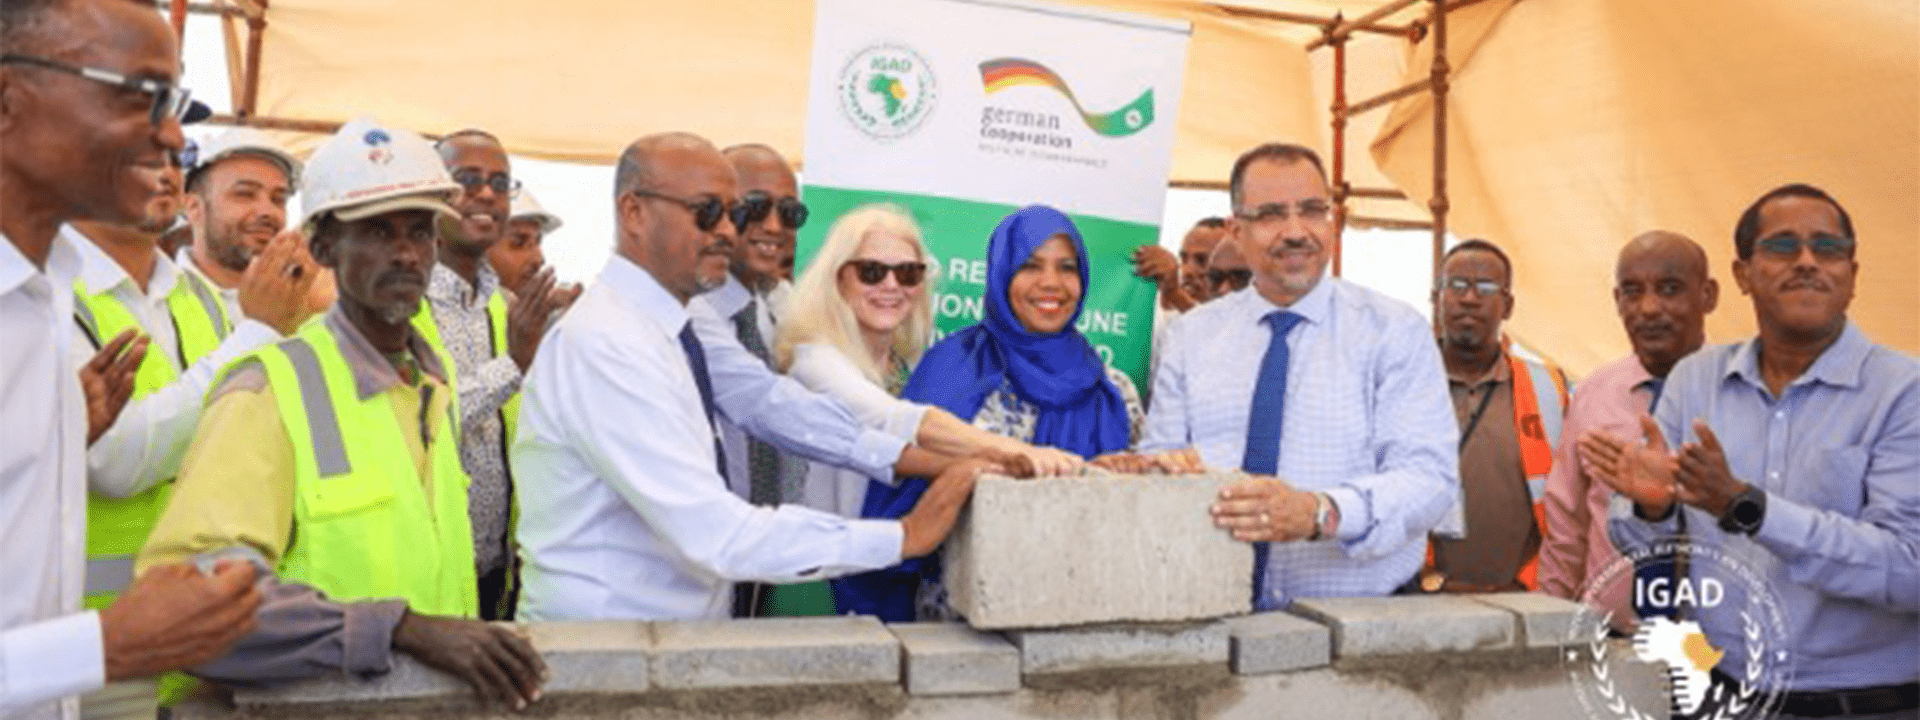 IGAD Laid Down Foundation for the Construction of Infrastructure in Djibouti